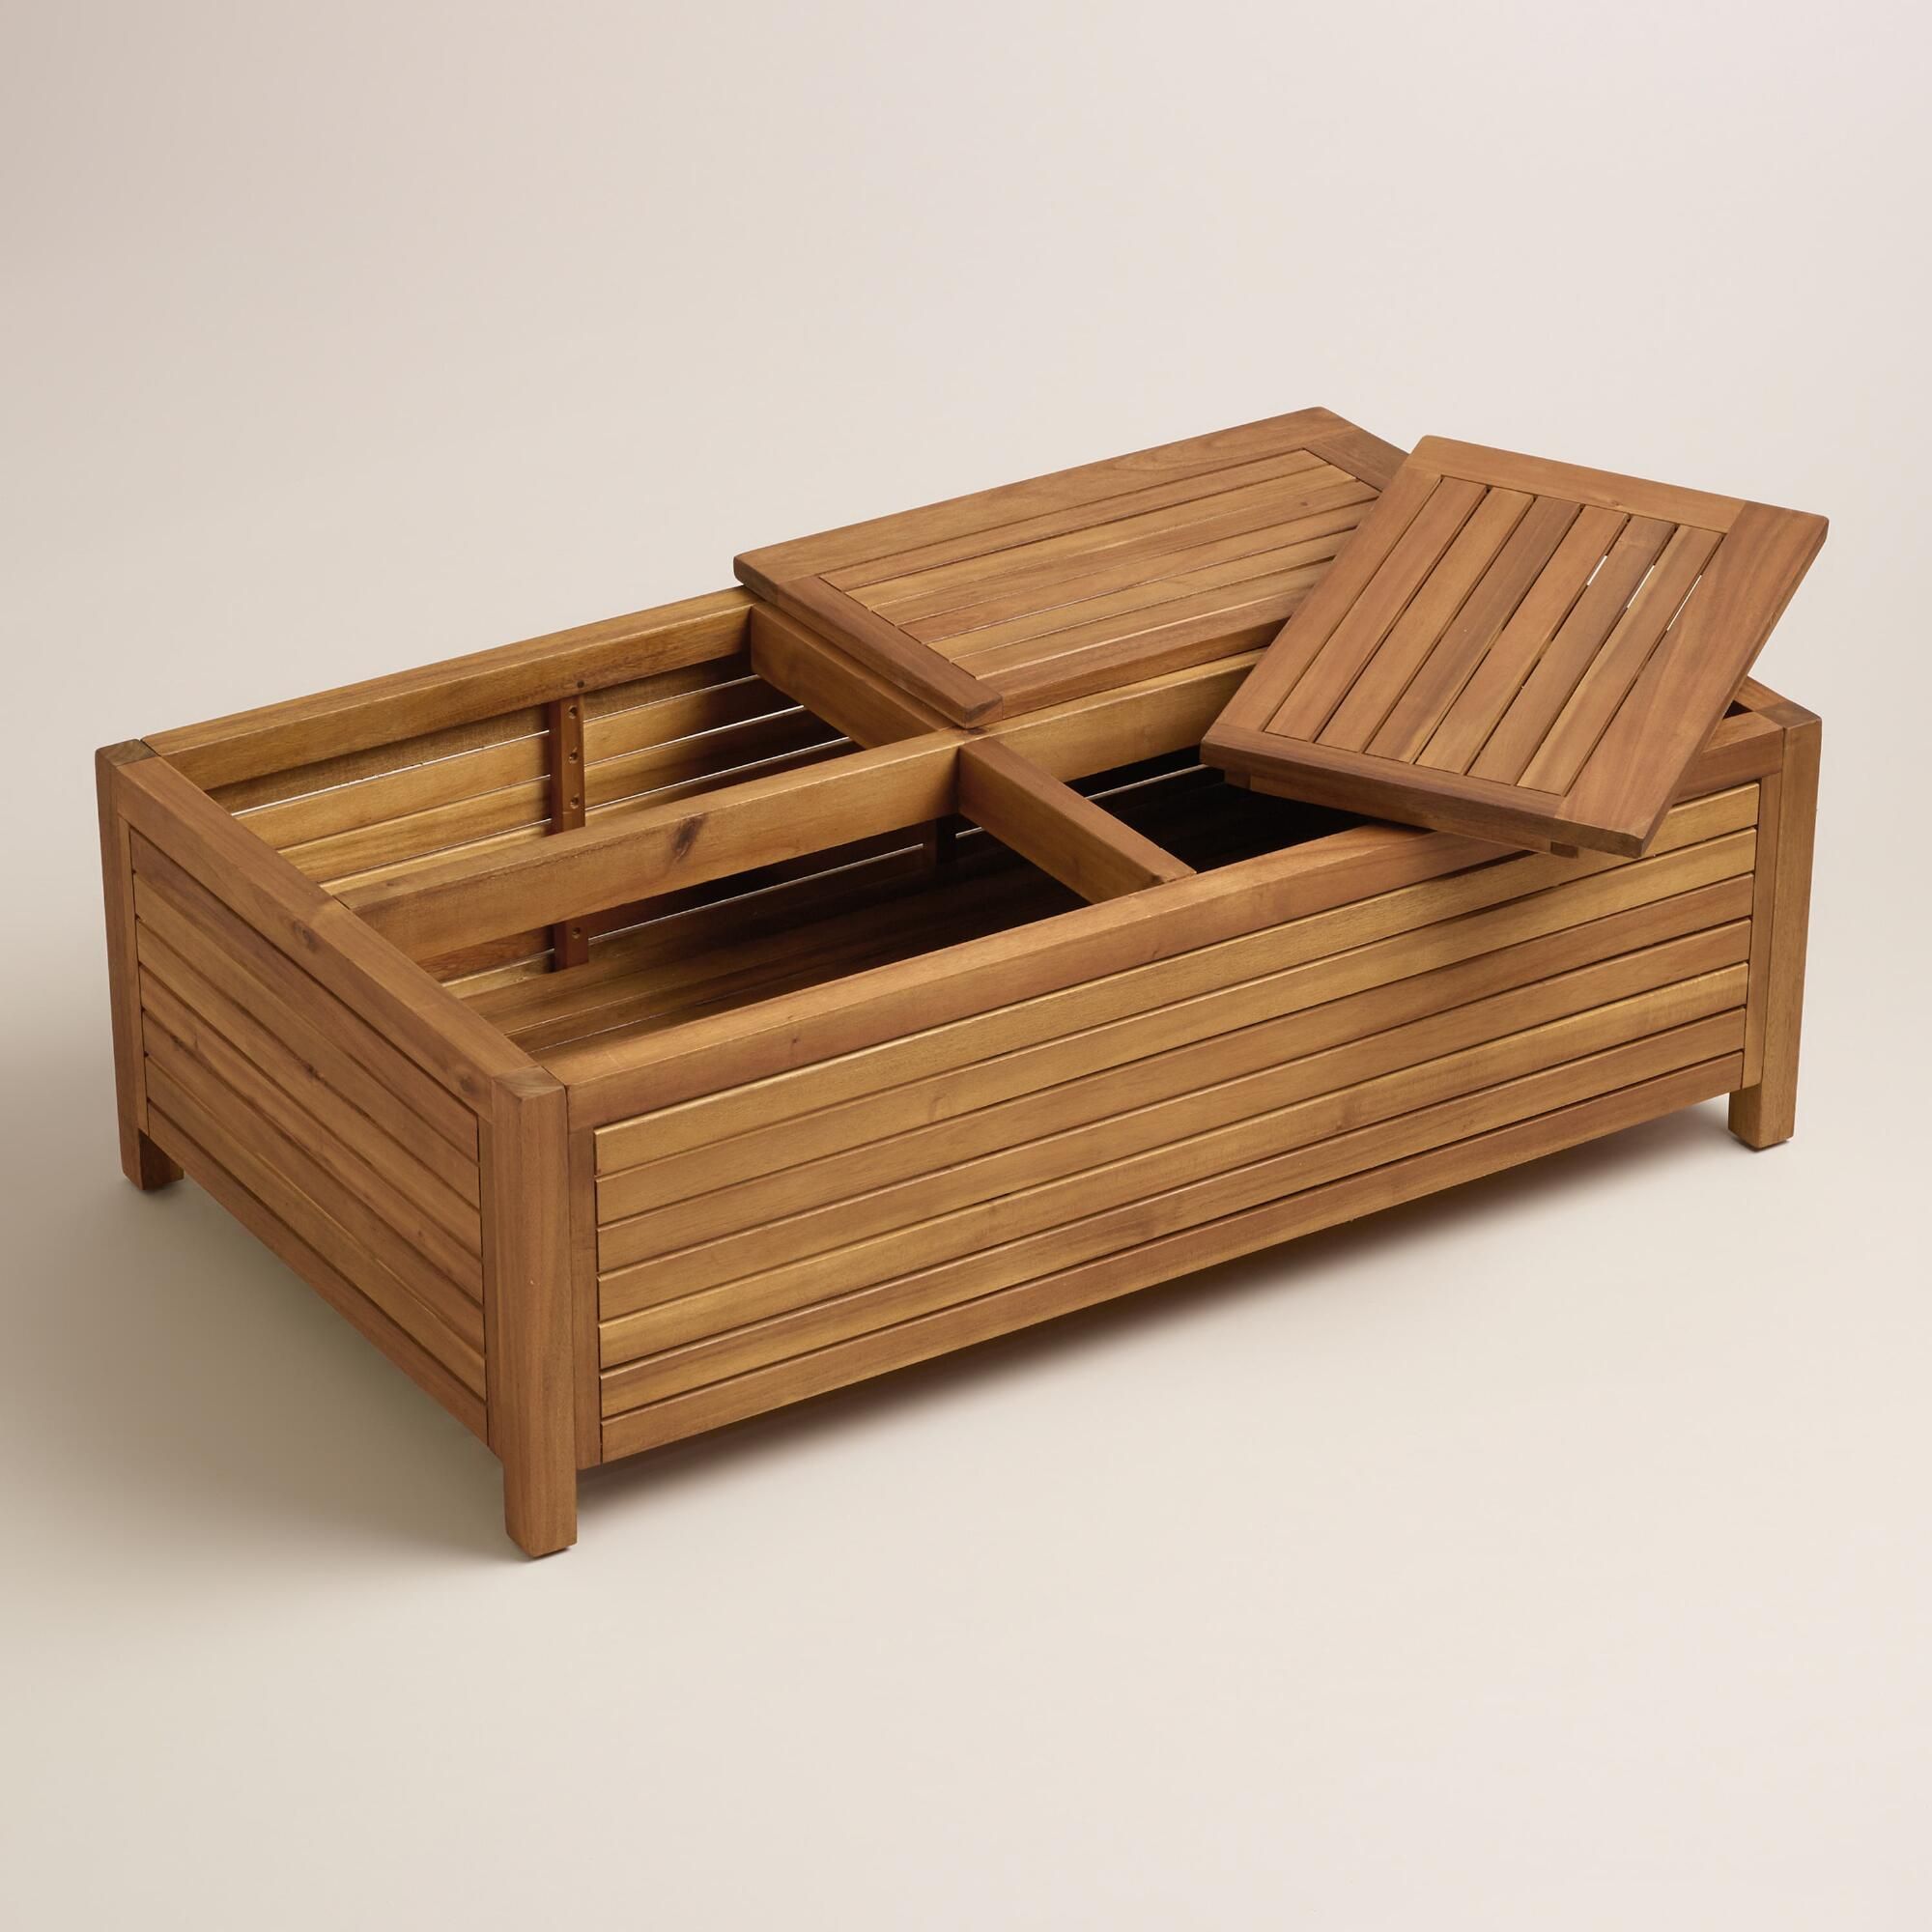 Wood Praiano Outdoor Storage Coffee Table From @worldmarket – A Great With Regard To Outdoor Coffee Tables With Storage (View 13 of 15)